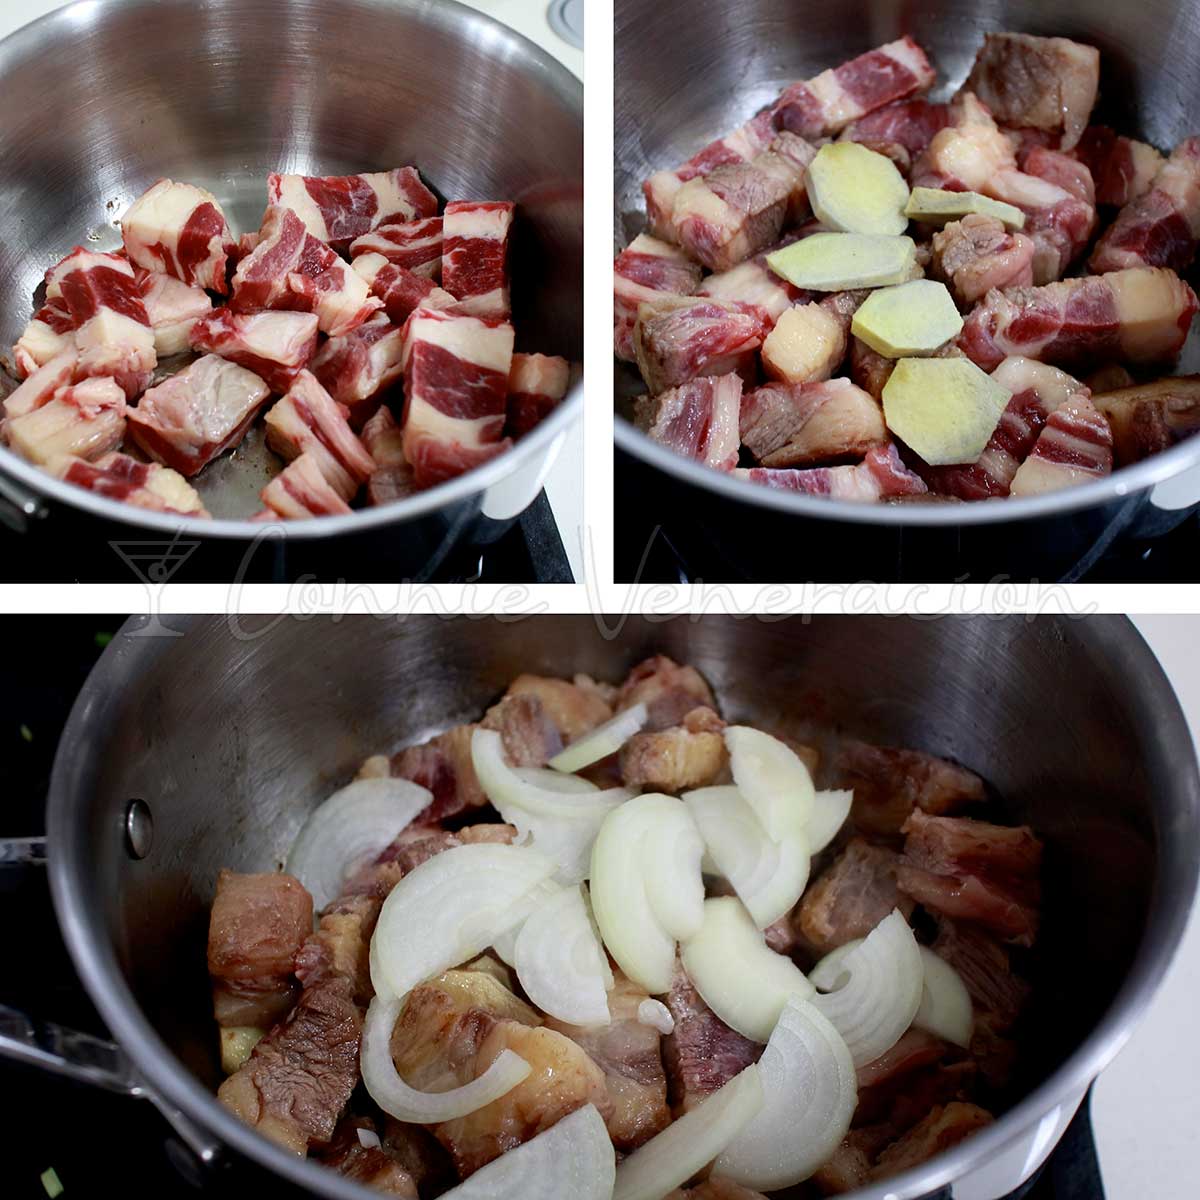 Browning cubes of beef short plate then sauteeing with ginger and onion